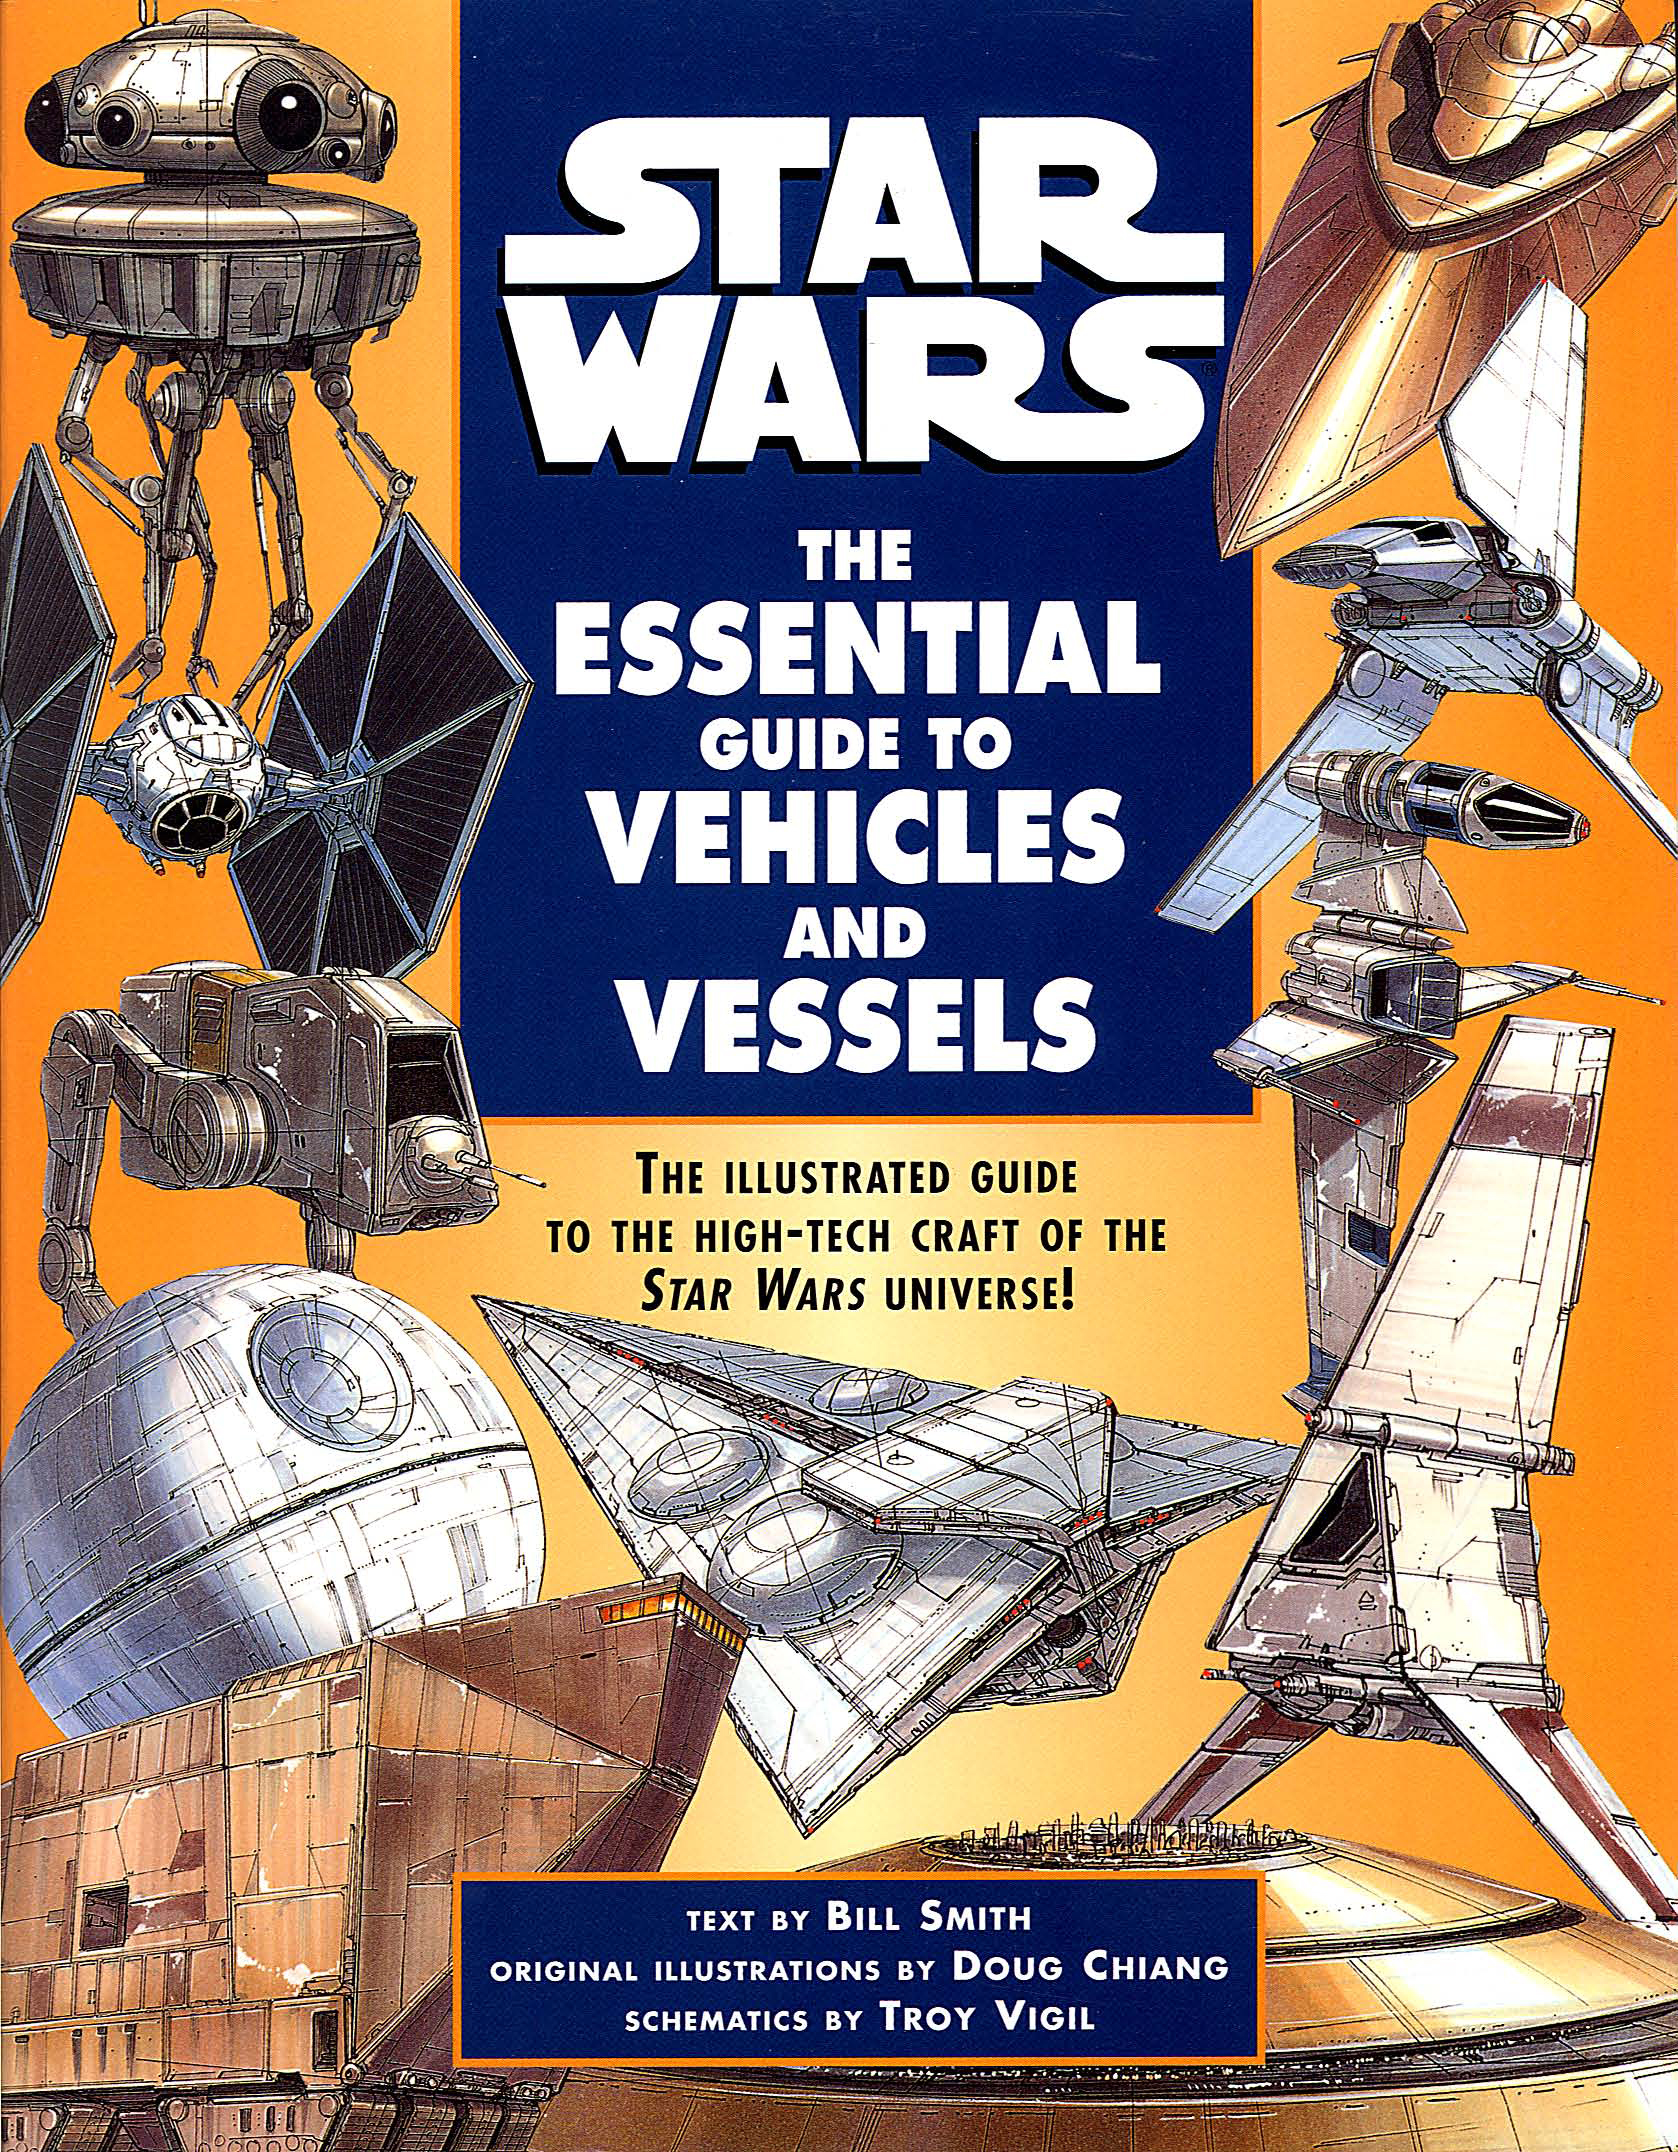 Star Wars – The Essential Guide to Vehicles and Vessels